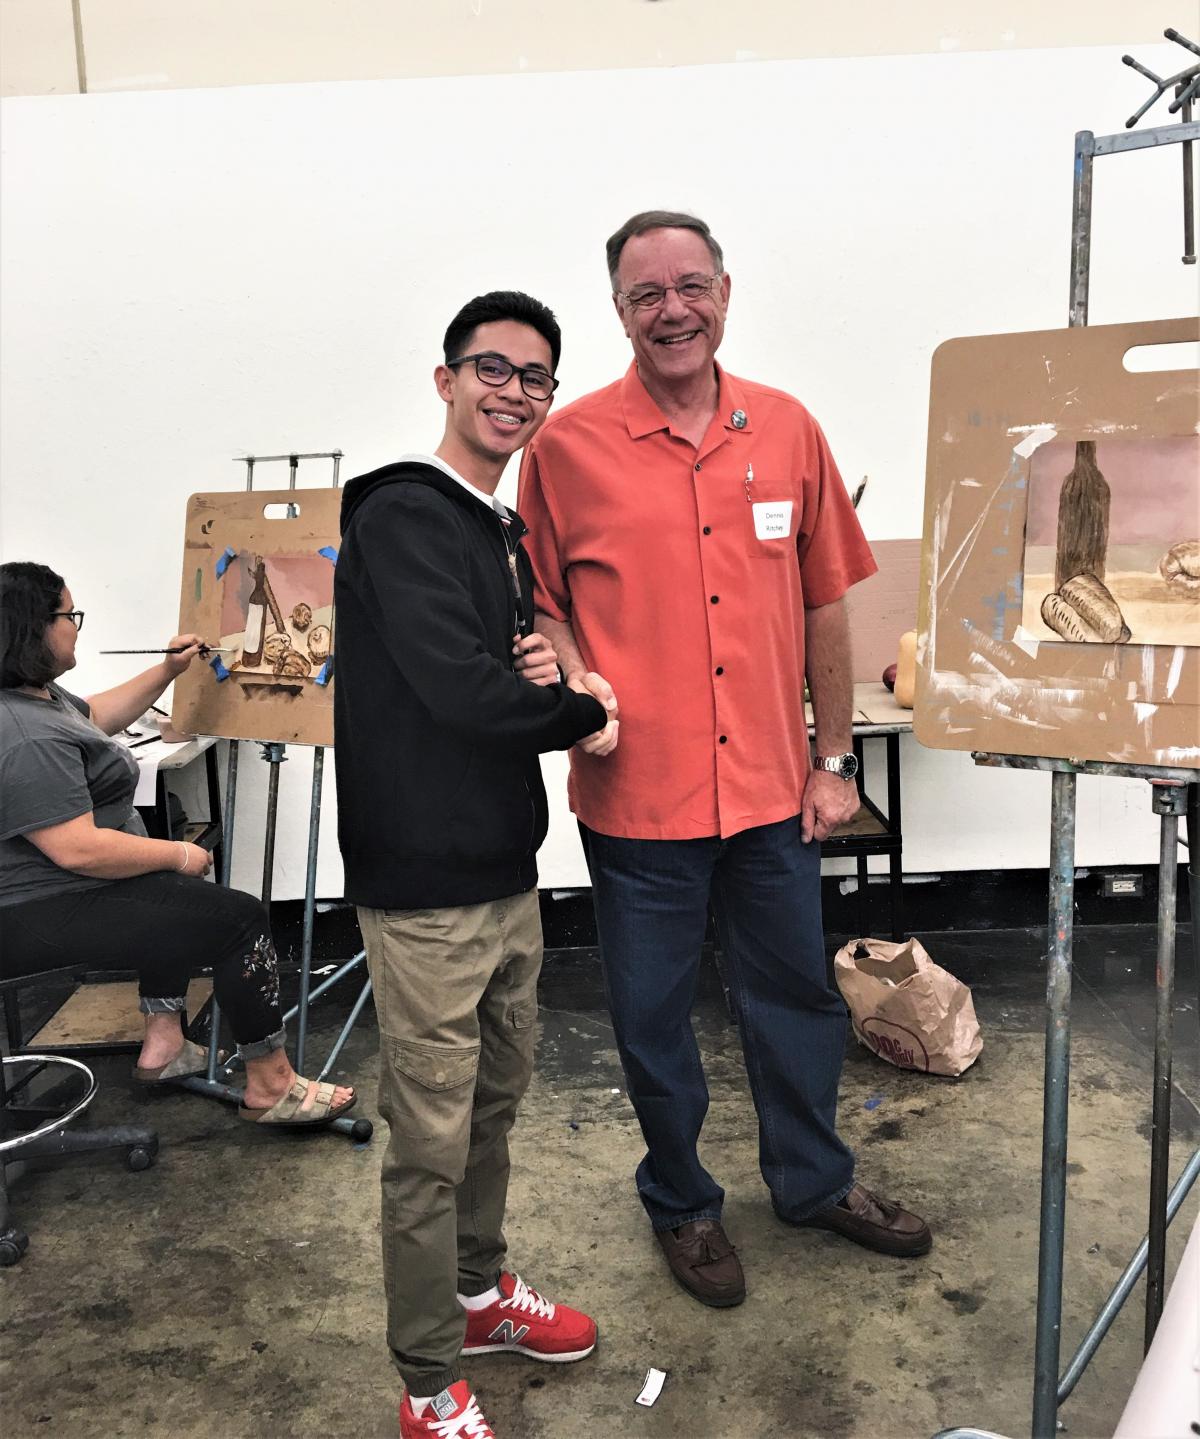 Dennis Ritchey with student Johnathan during Ryman Arts class at Cal State Fullerton